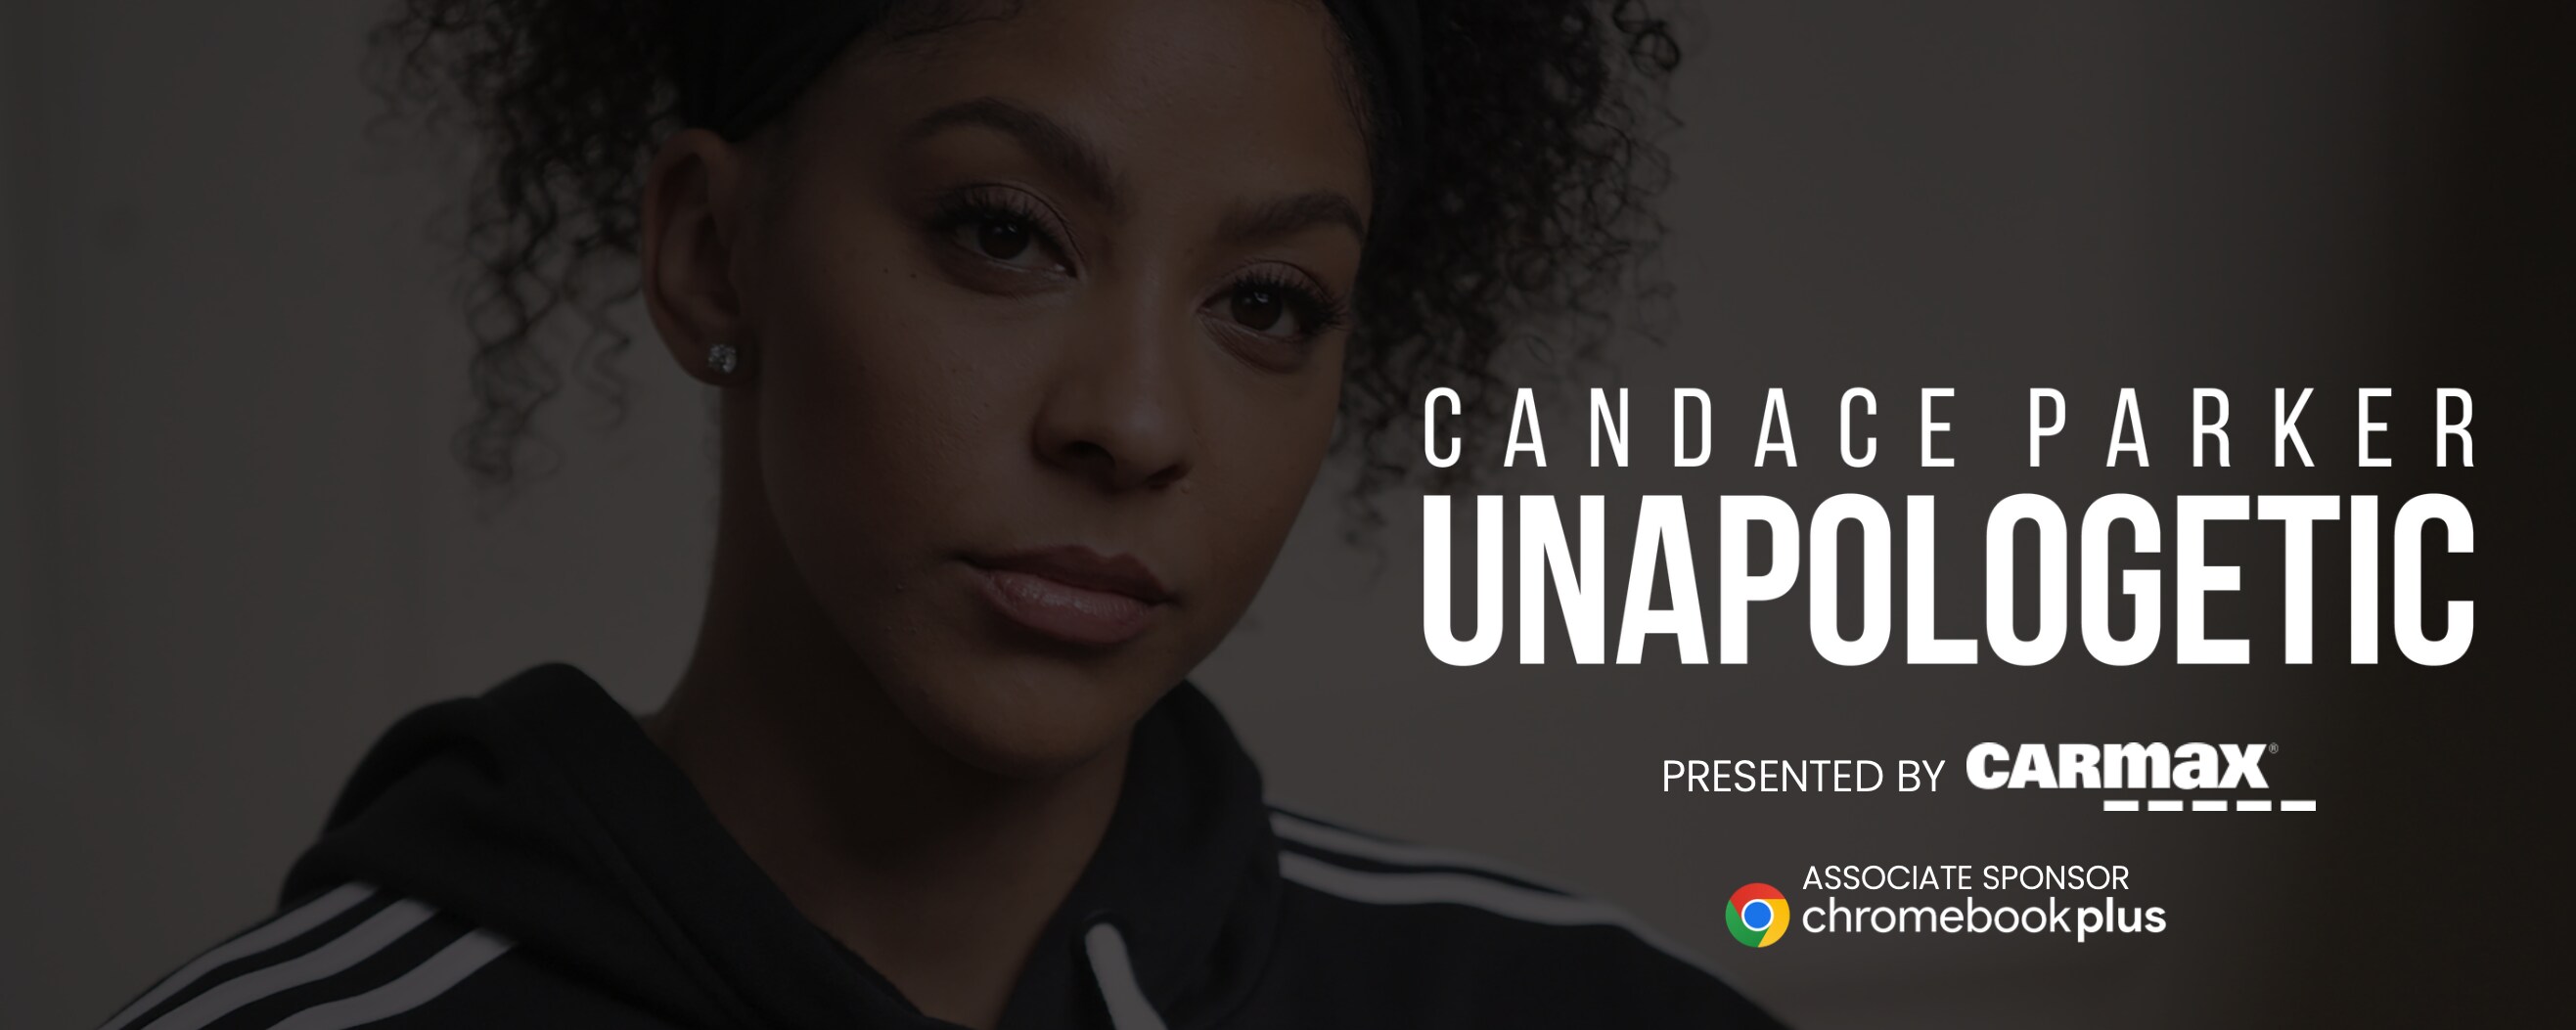 CarMax and Chromebook Plus Join ESPN Films Candace Parker: Unapologetic Celebrating Three-Time WNBA Champion Candace Parker 